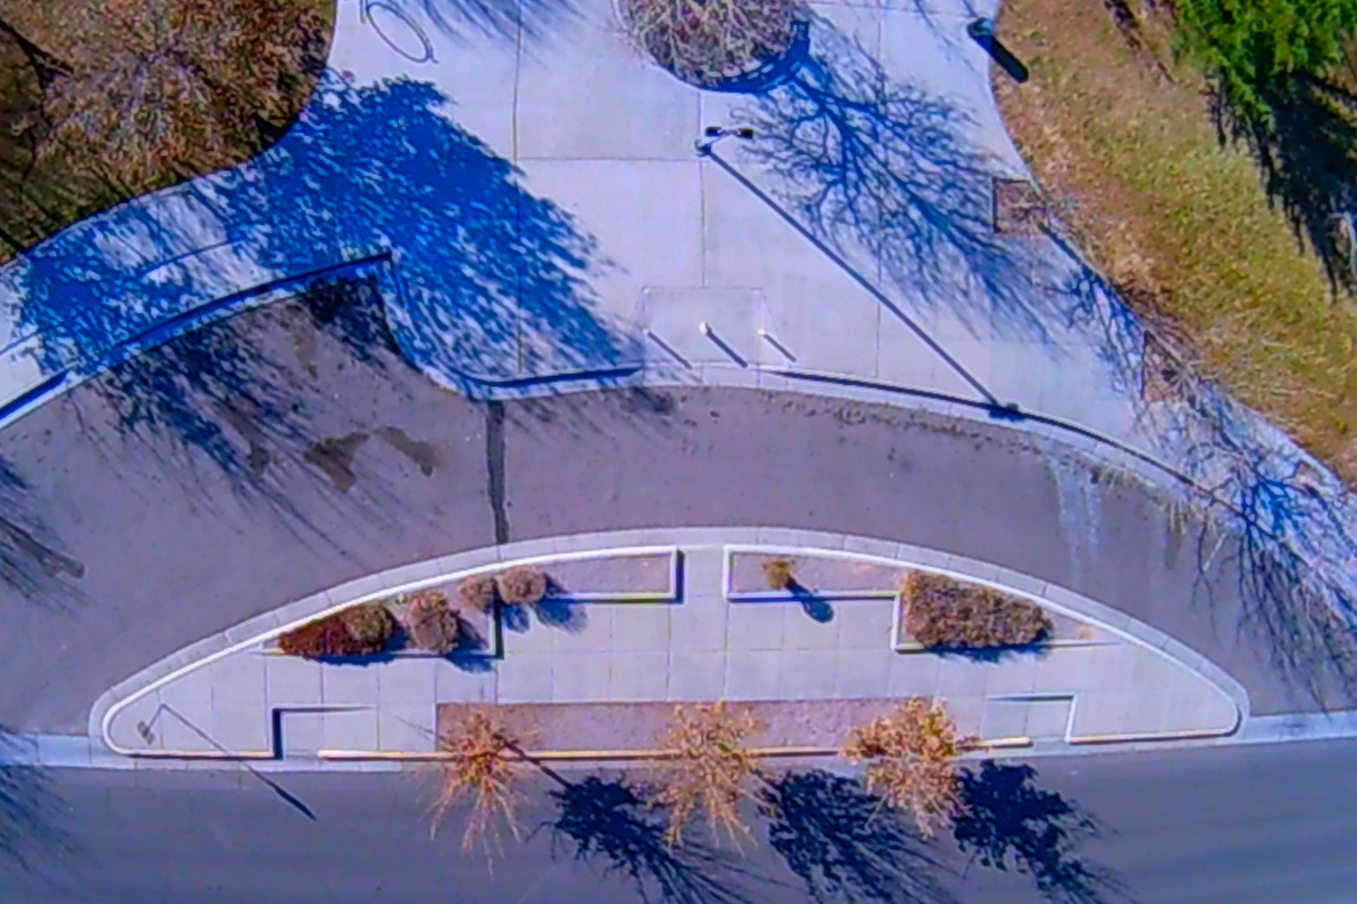 Overhead (God's eye) photo of the driveway cutout at Bel Air-Miramontes Park. The colors are enhanced for artistic effect.